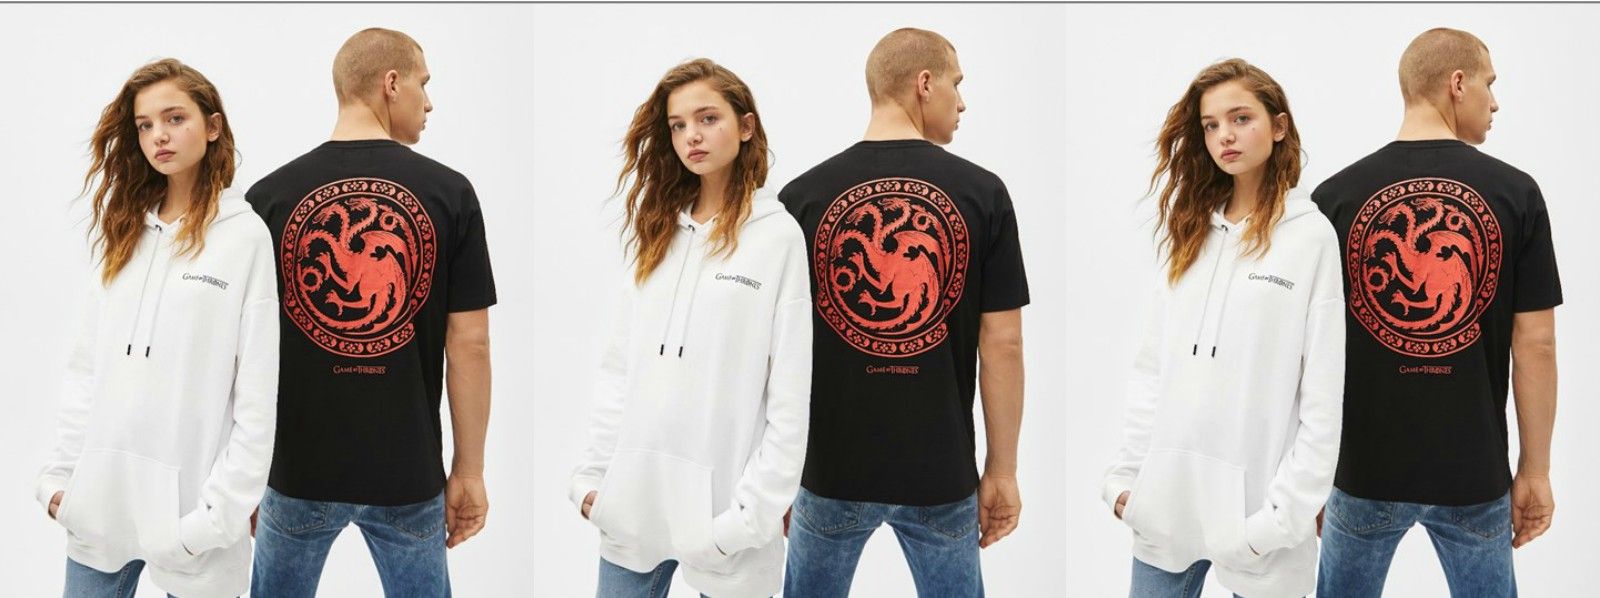 admin ajax.php?action=kernel&p=image&src=%7B%22file%22%3A%22wp content%2Fuploads%2F2019%2F04%2Fimages easyblog articles 7684 BERSHKA GAME OF THRONES